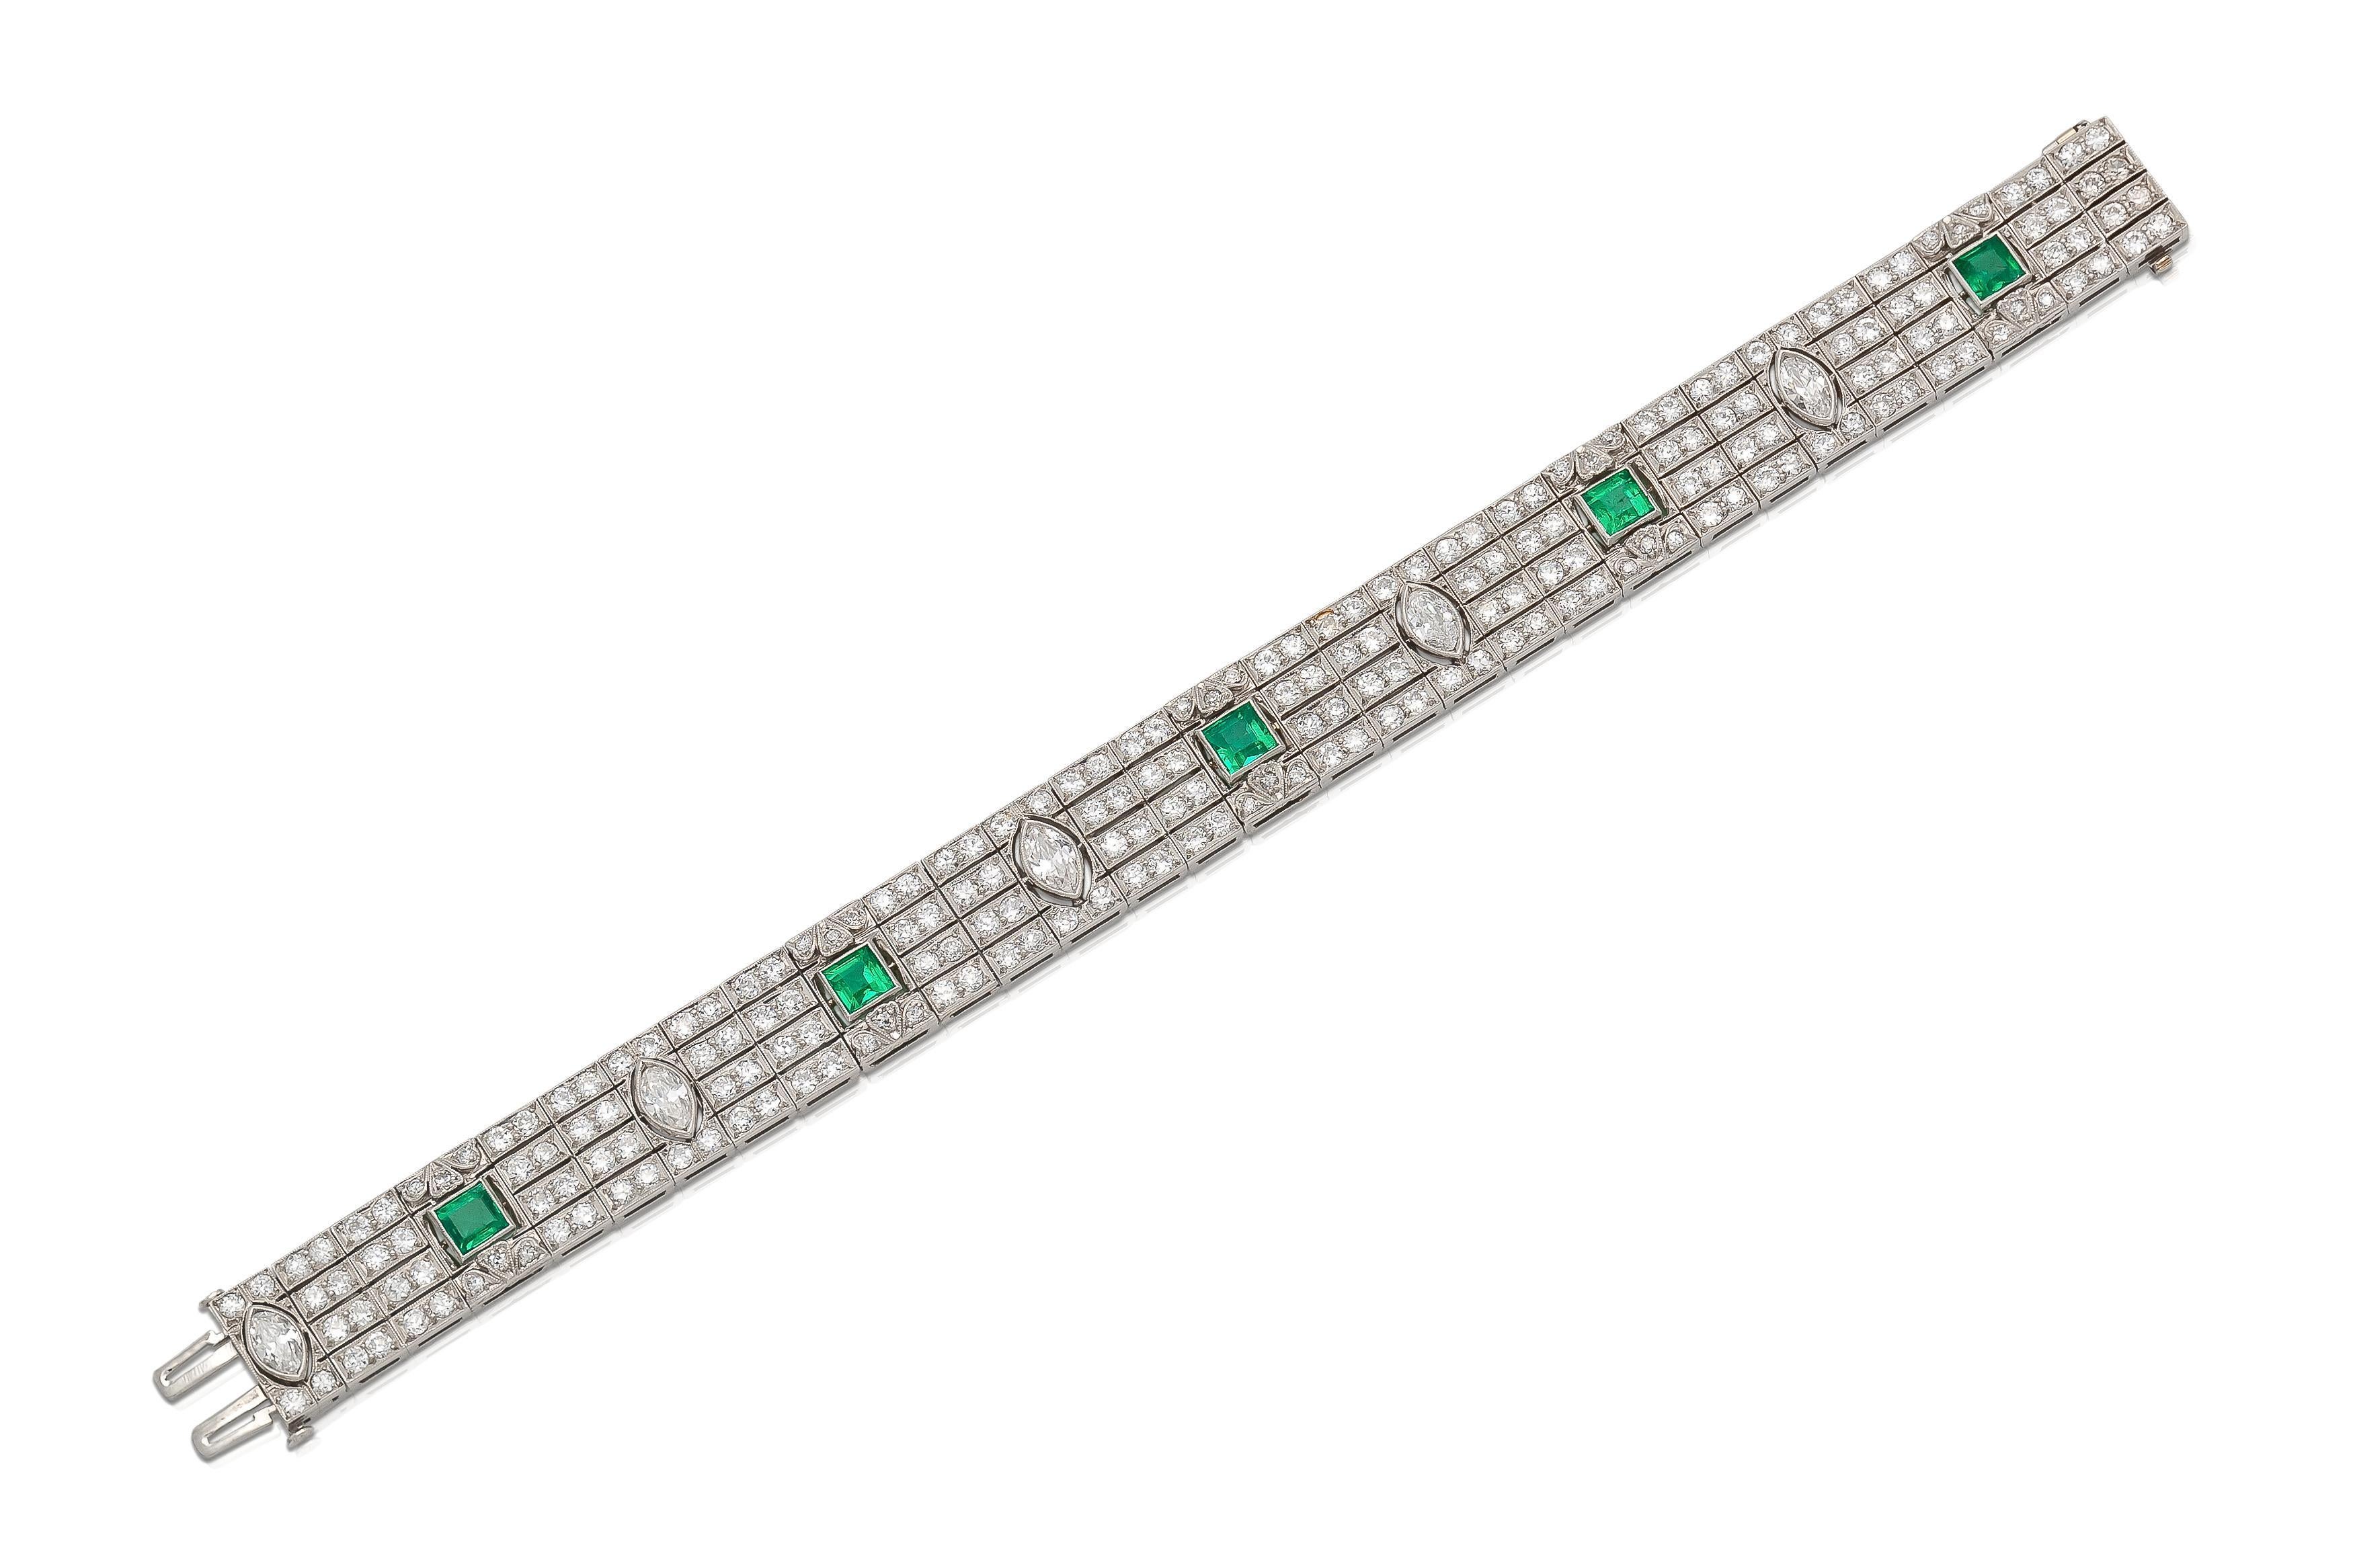 Finely crafted in platinum with 5 Square cut Emerald weighing approximately a total of 4.00 carats, 5 Marquise cut Diamonds weighing approximately a total of 2.00 carats, and 200 small Round cut diamonds weighing approximately a total of 12.00